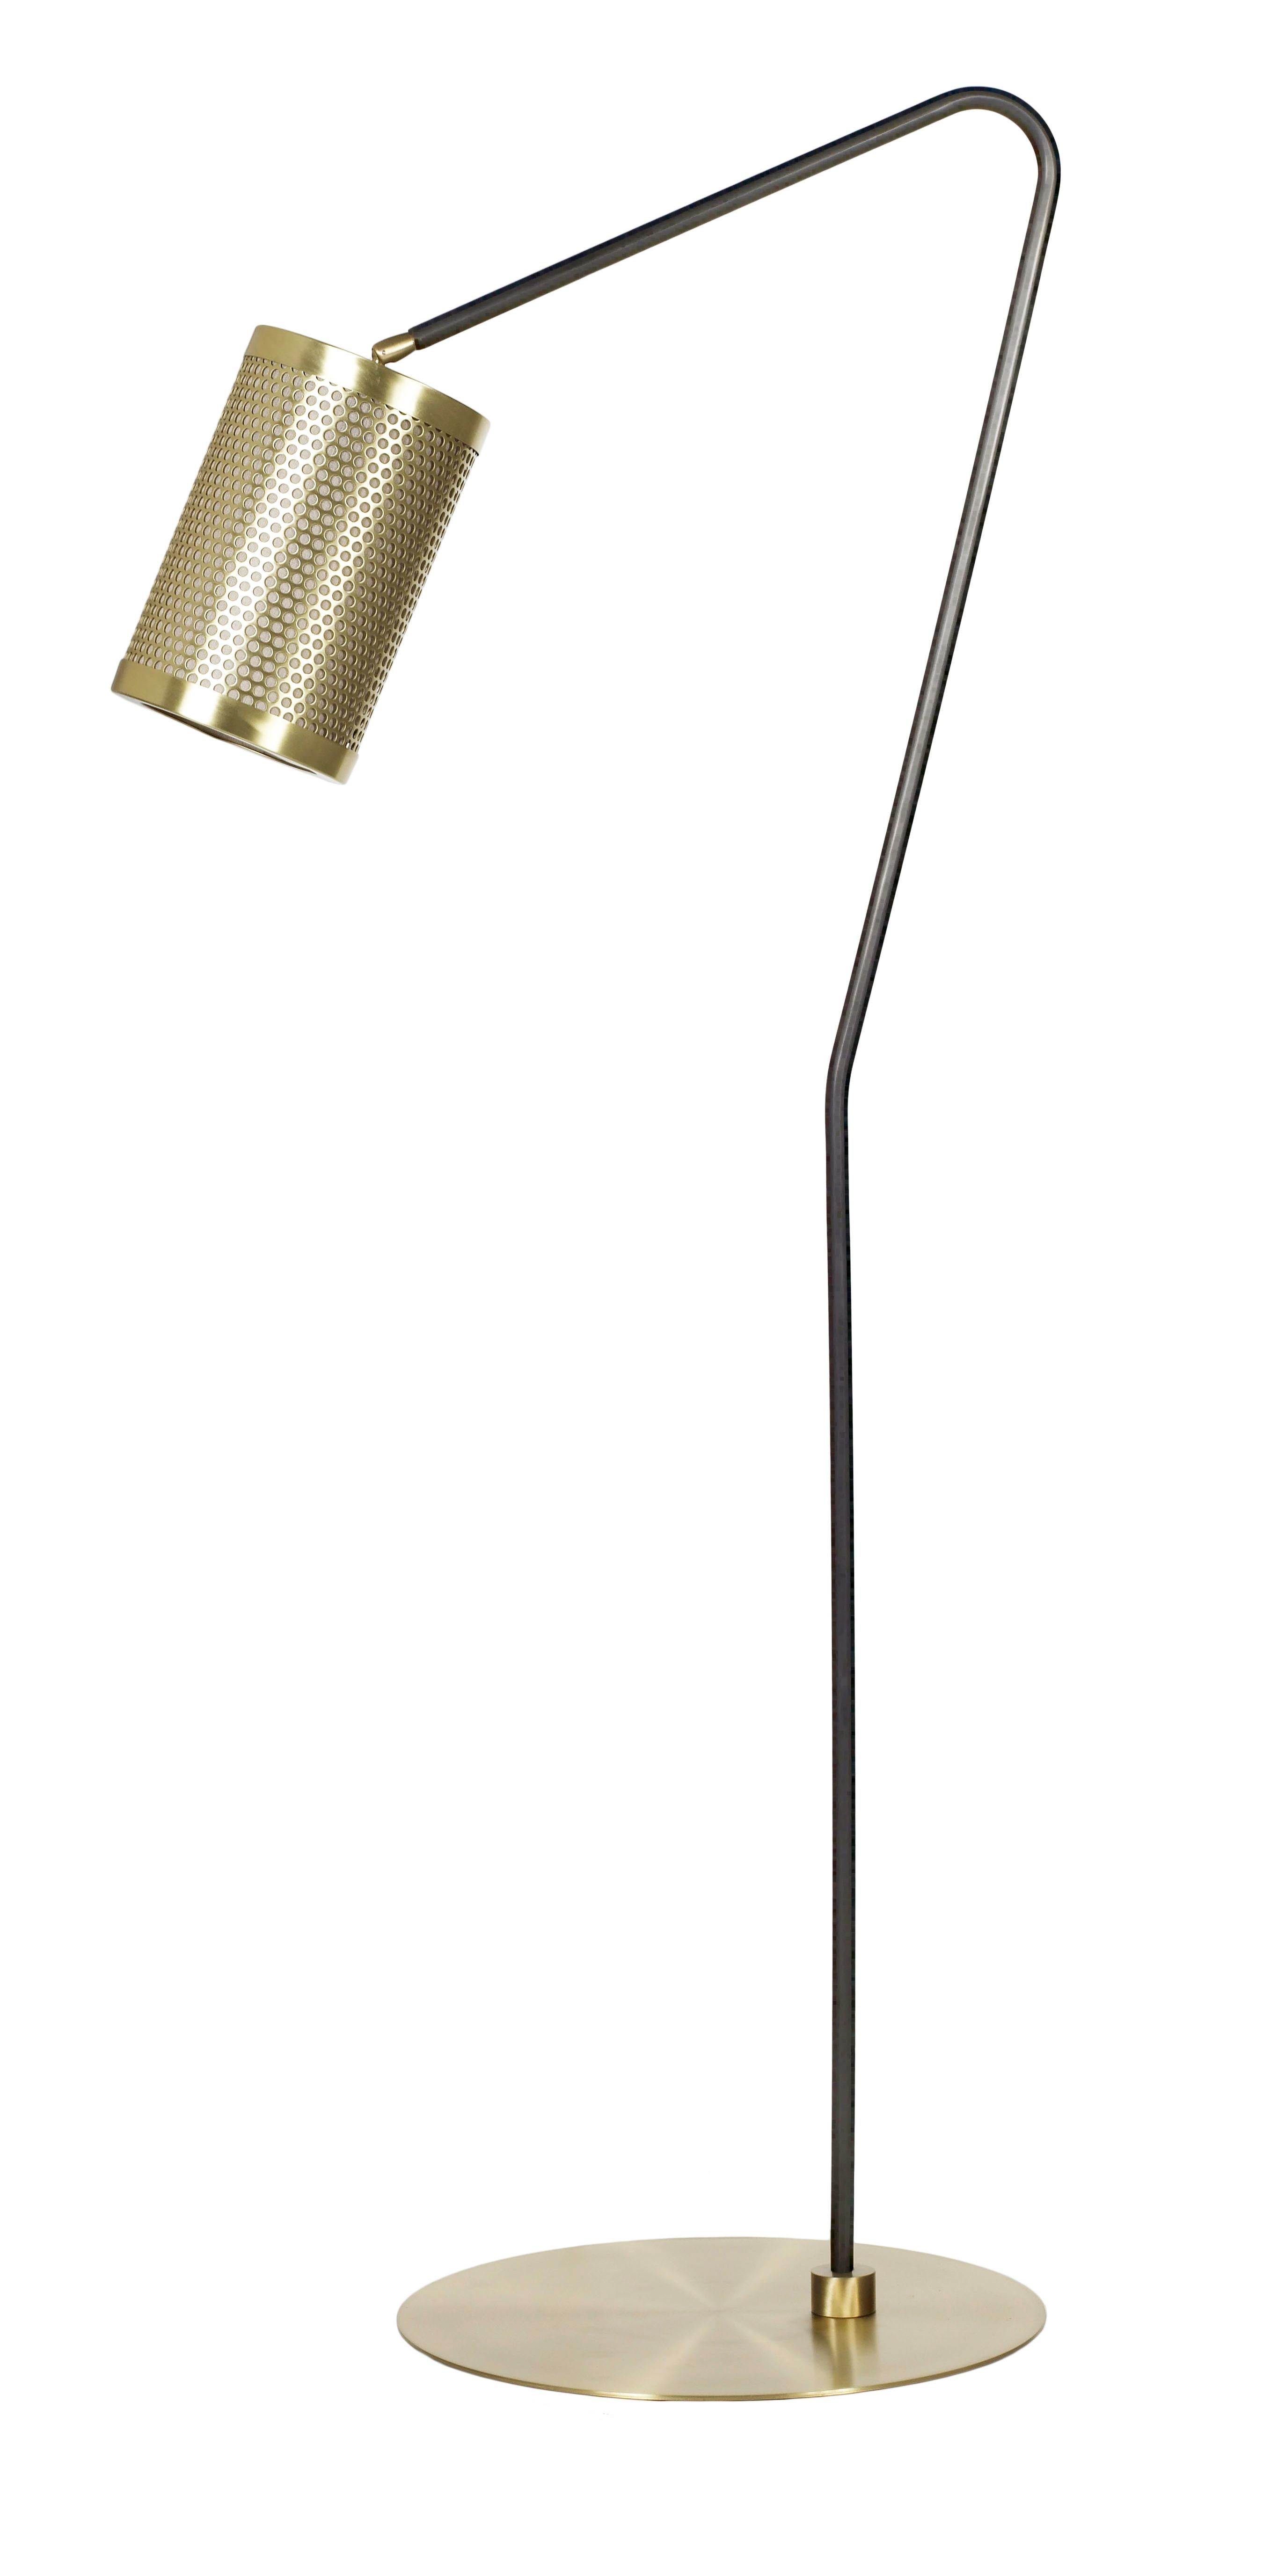 Pierre floor lamp by CTO Lighting.
Materials: bronze with satin brass base, satin brass perforated drum shade.
Dimensions: H 141 x W 58 cm.

All our lamps can be wired according to each country. If sold to the USA it will be wired for the USA for